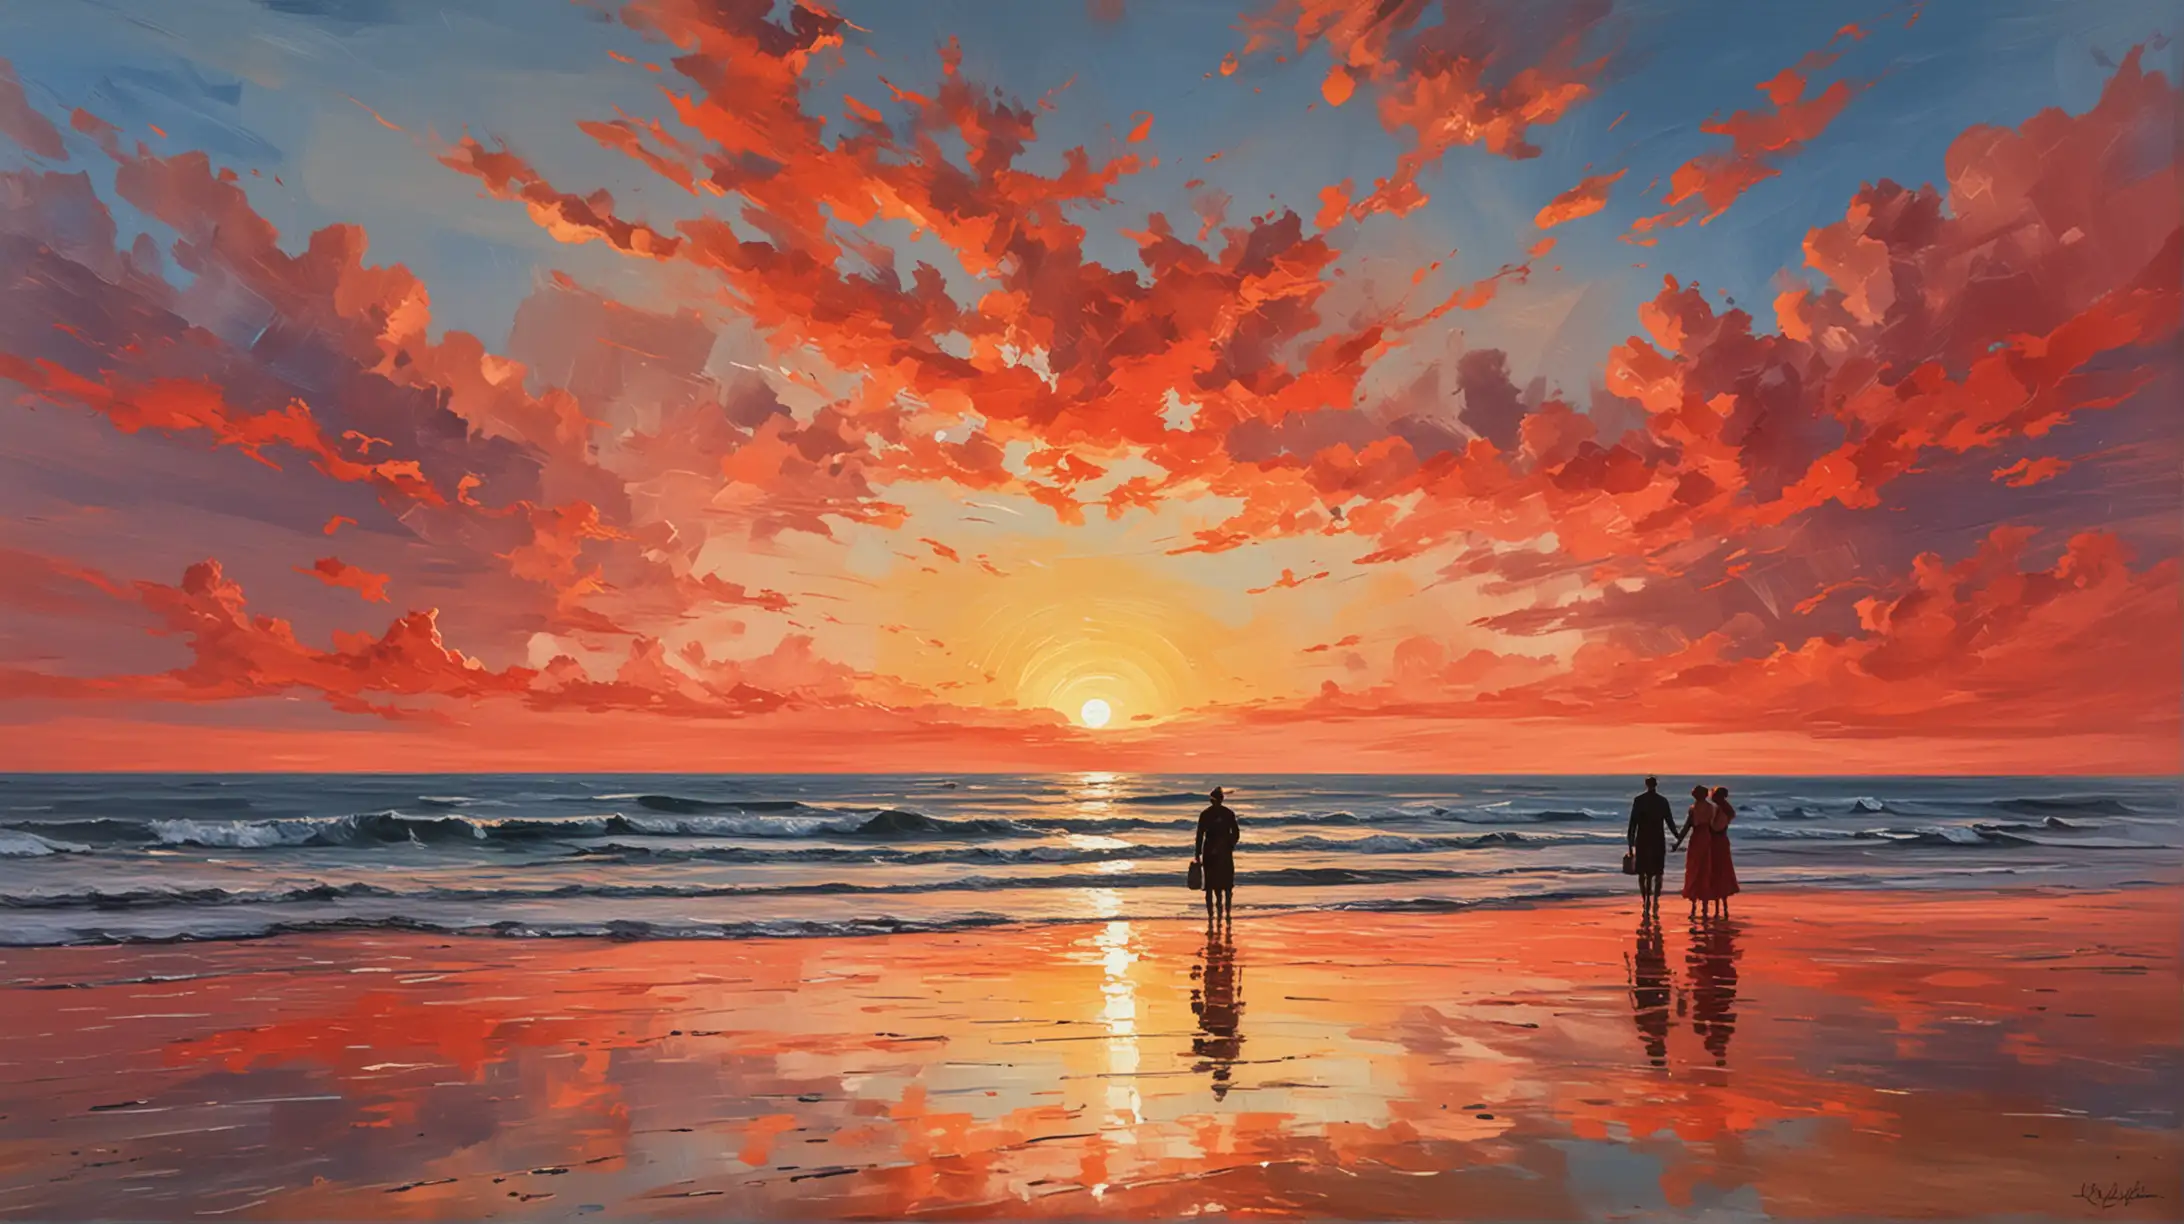 in manet style create and end of the day coastal sunset with a couple walking on the beach with reflection of sunset in part of ocean and red in the part of the sky looking diffused like his paintings